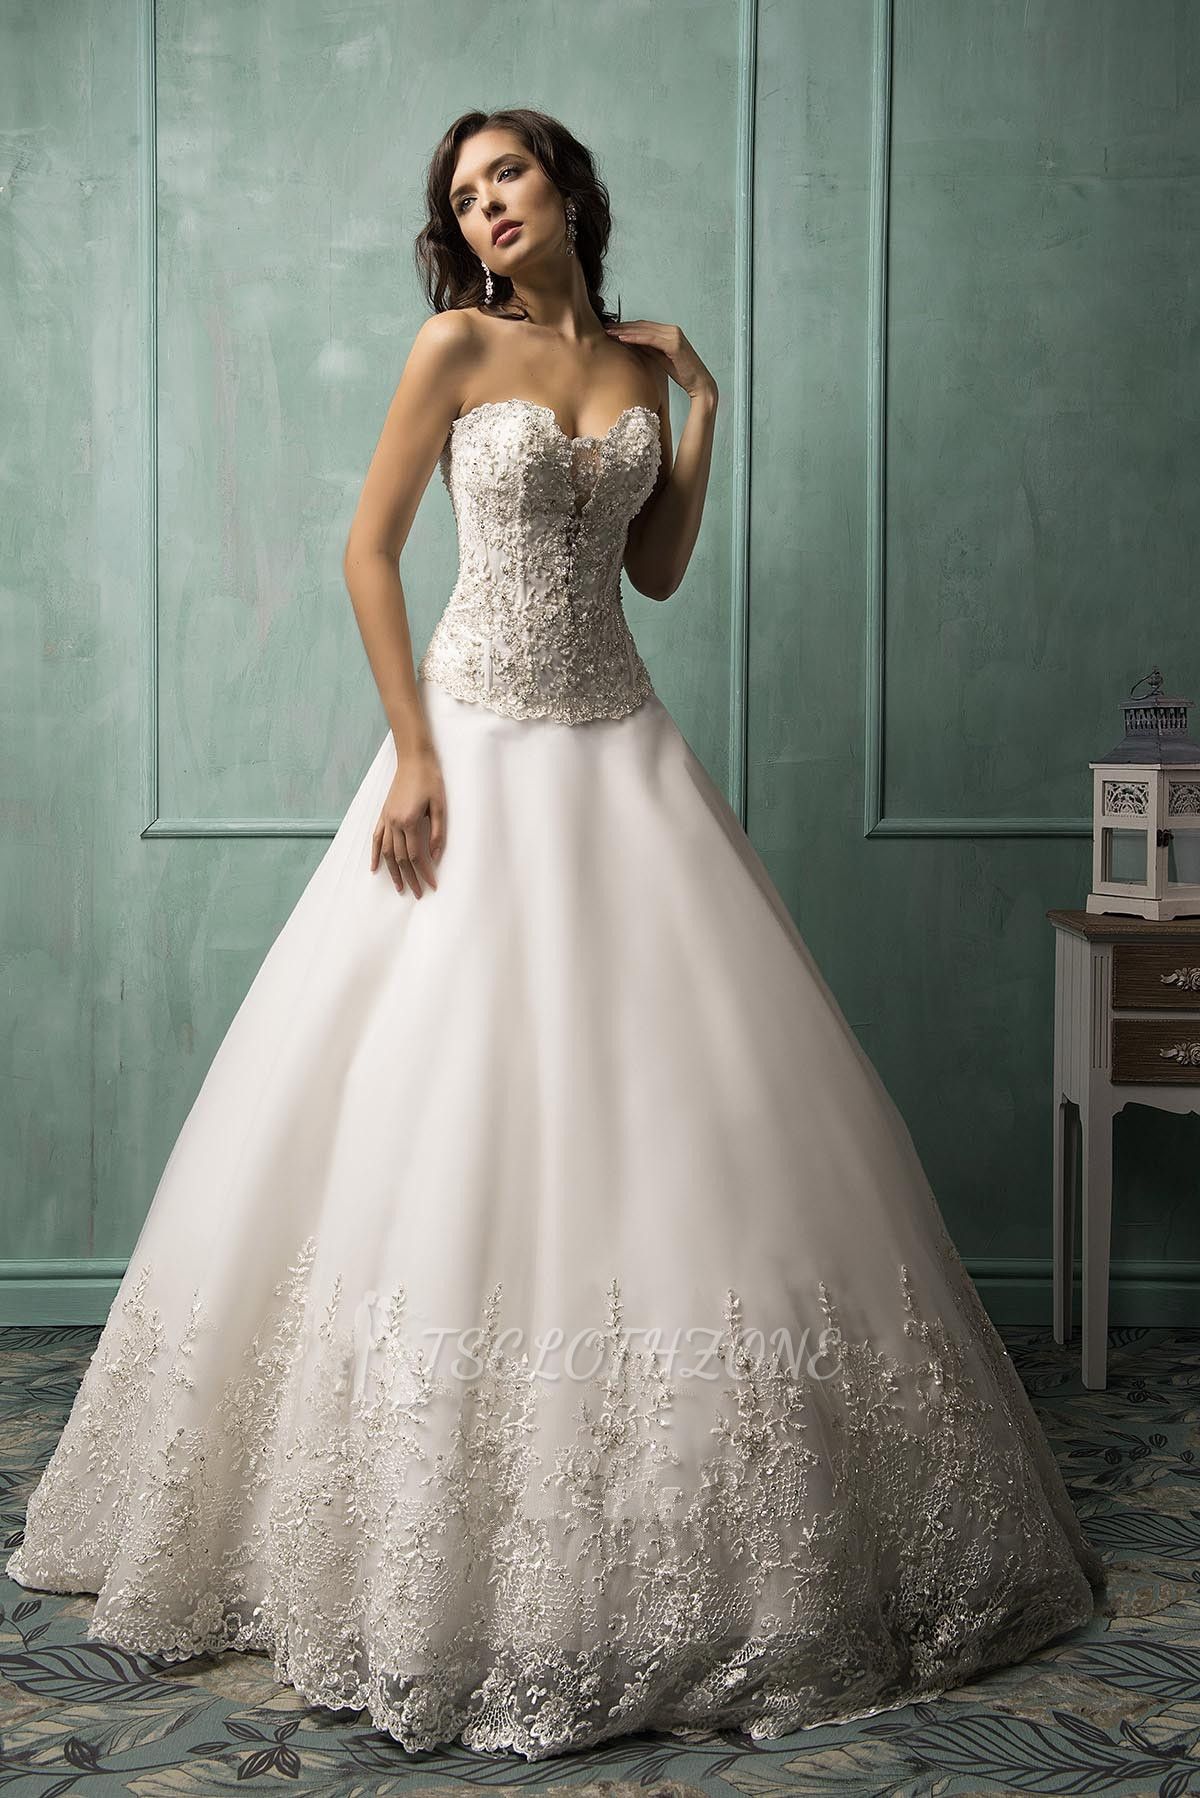 Gorgeous Sweetheart Lace 2022 Wedding Dress A-line Court Train Bridal Gown